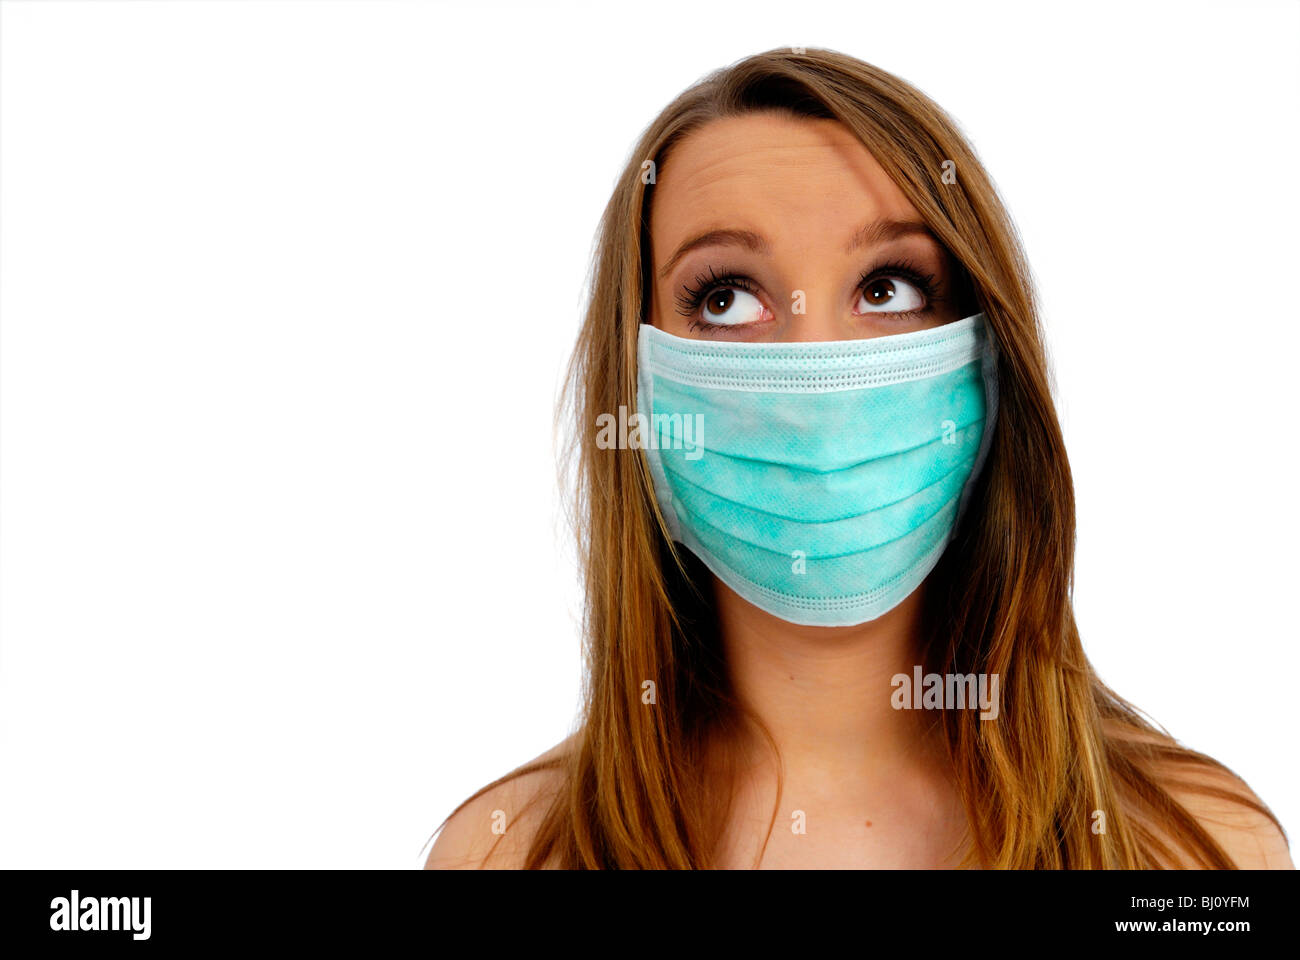 Woman with mouth guards, swine flu Stock Photo